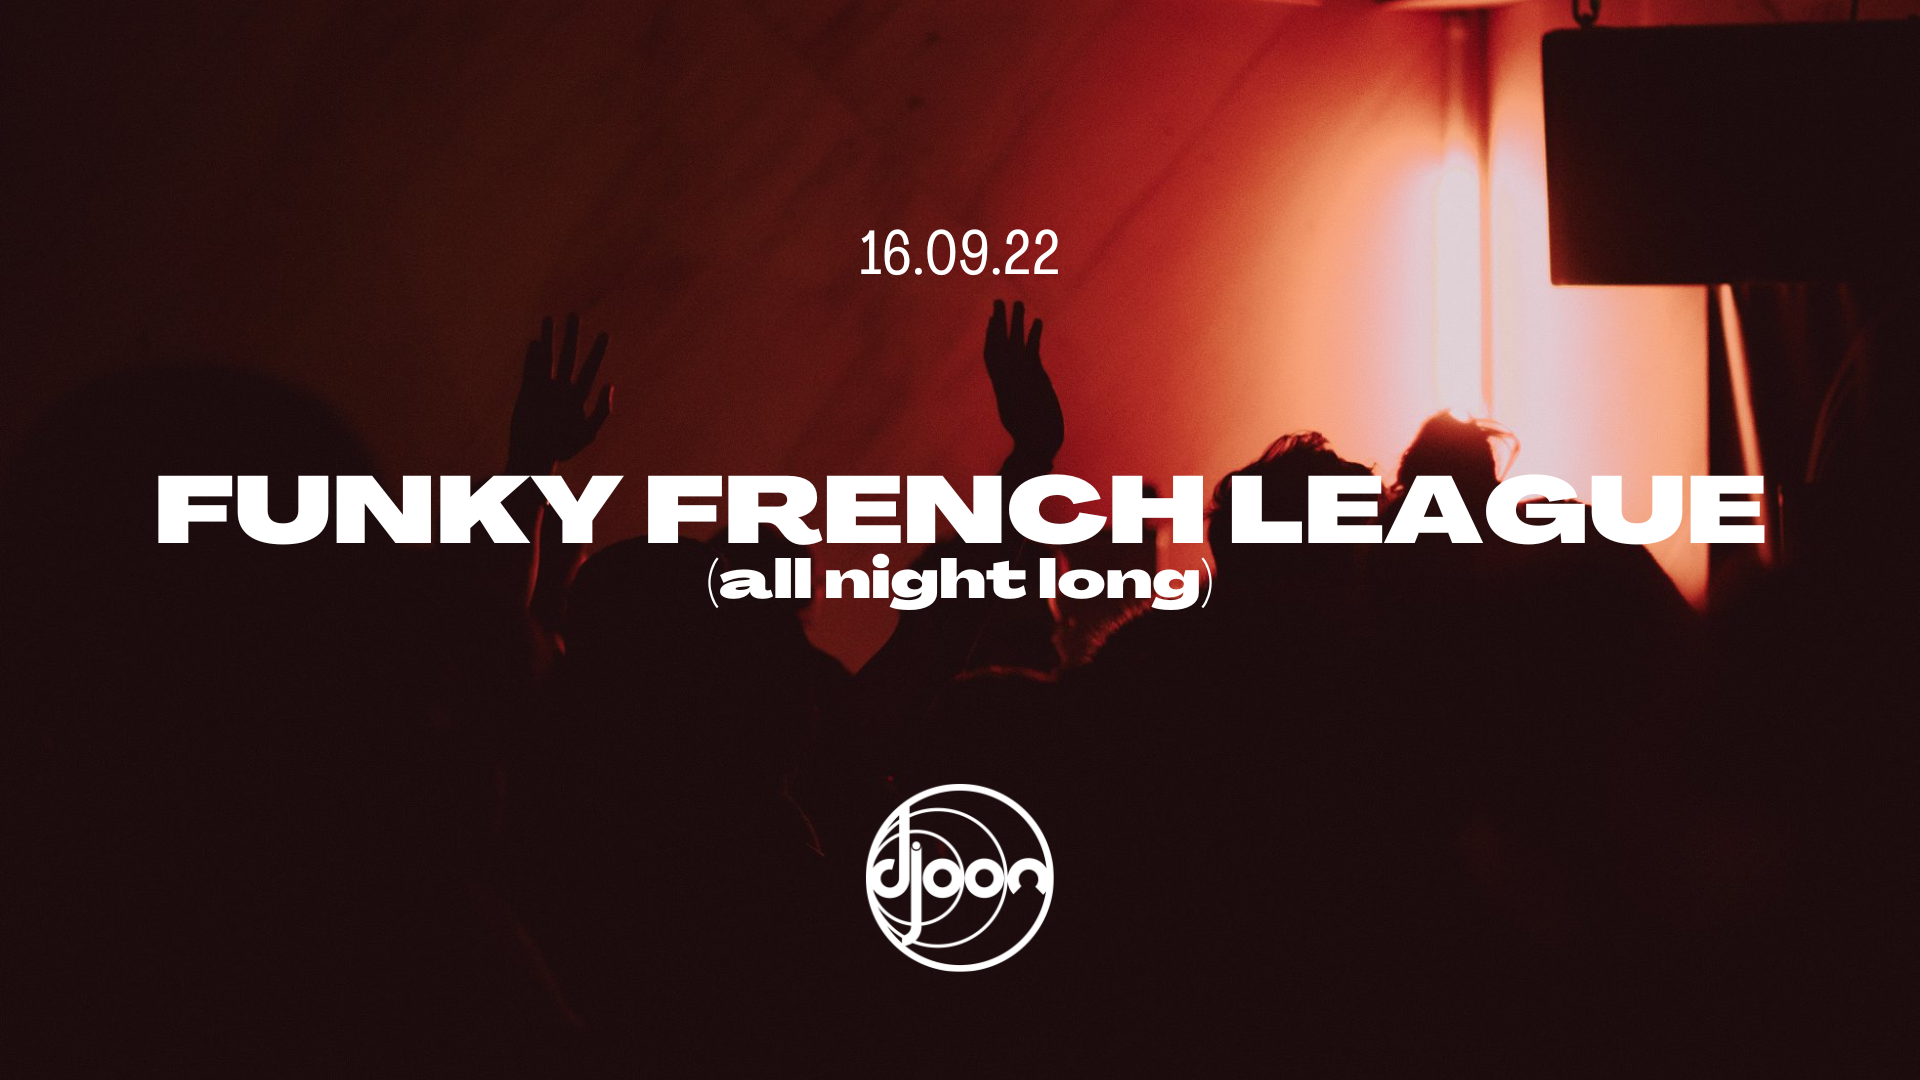 Djoon: Funky French League (all night long) - Flyer front